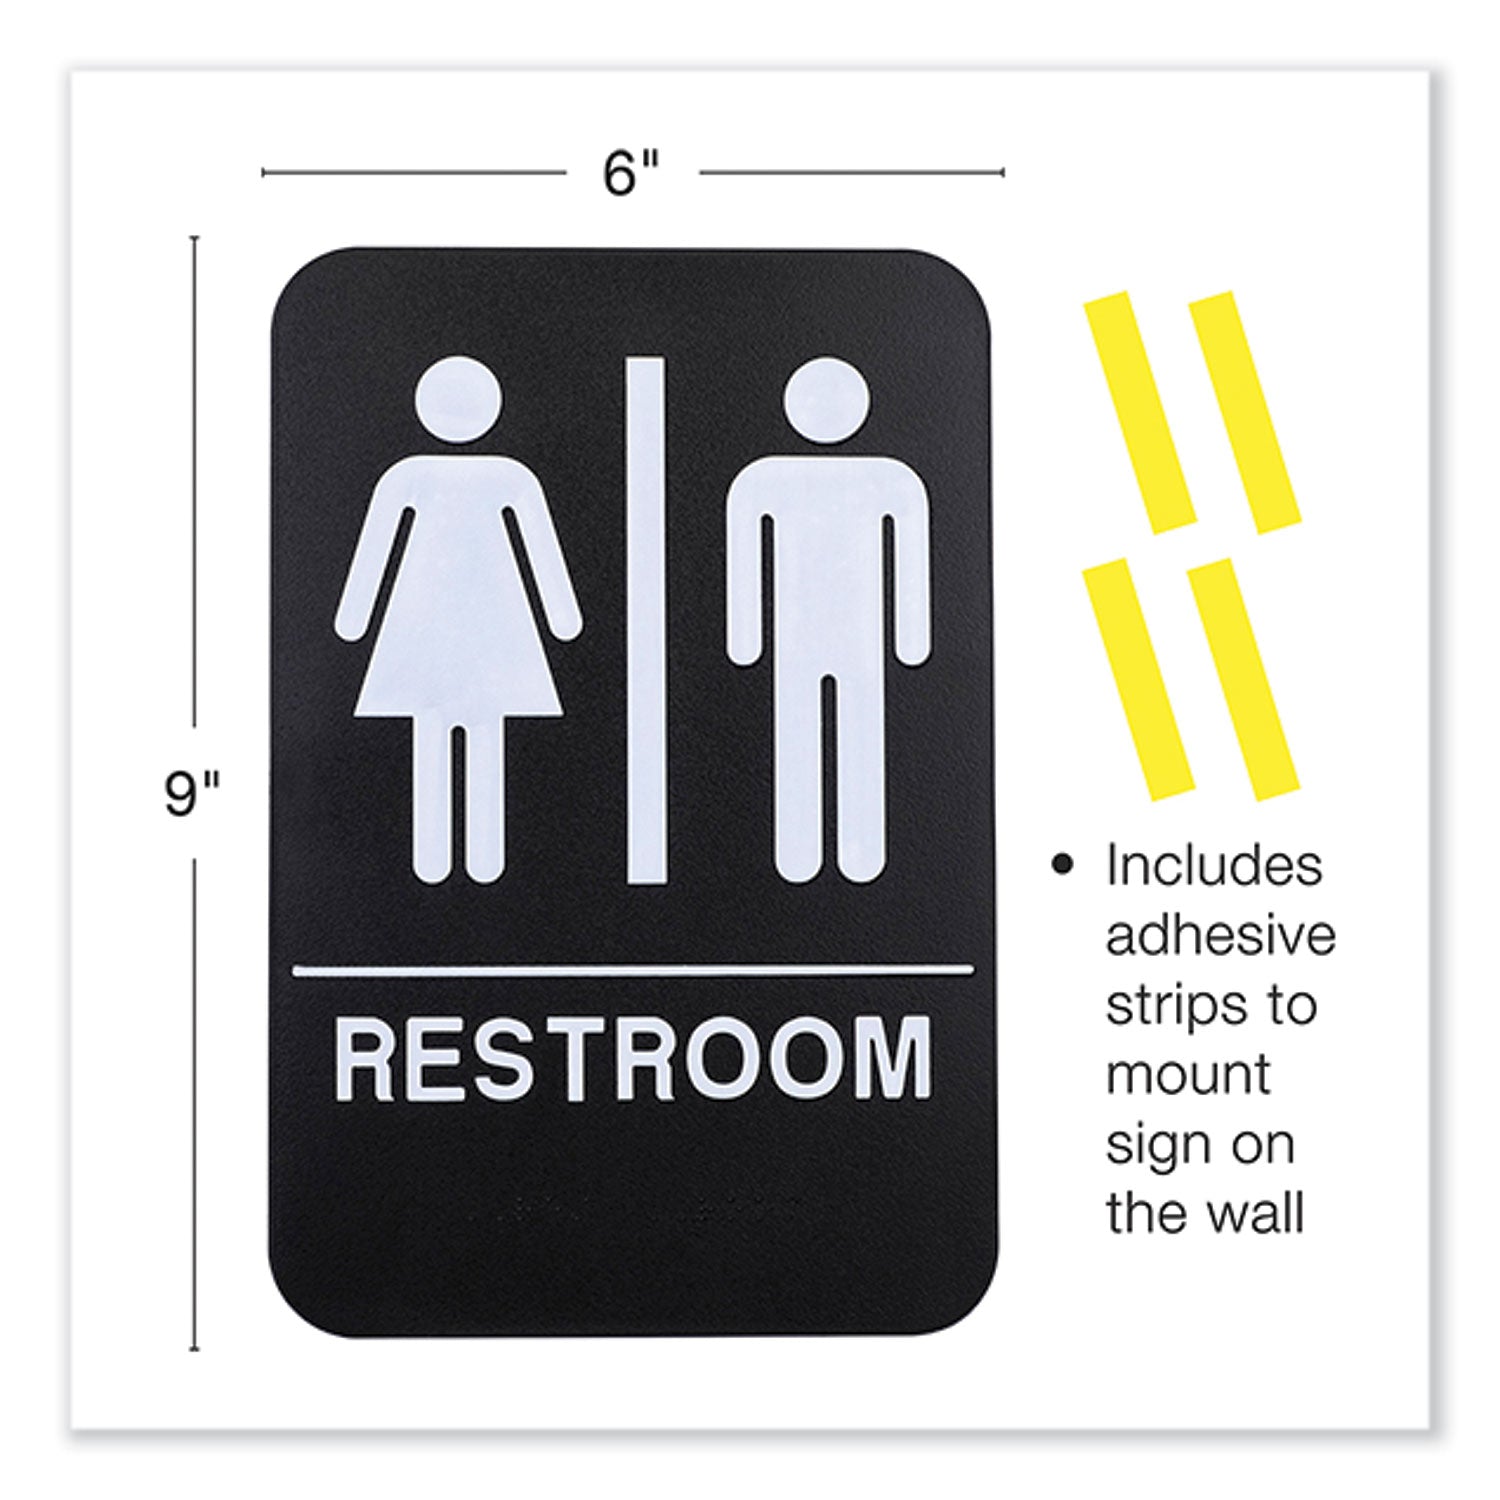 indoor-outdoor-restroom-with-braille-text-6-x-9-black-face-white-graphics-3-pack_exohd0275s - 2